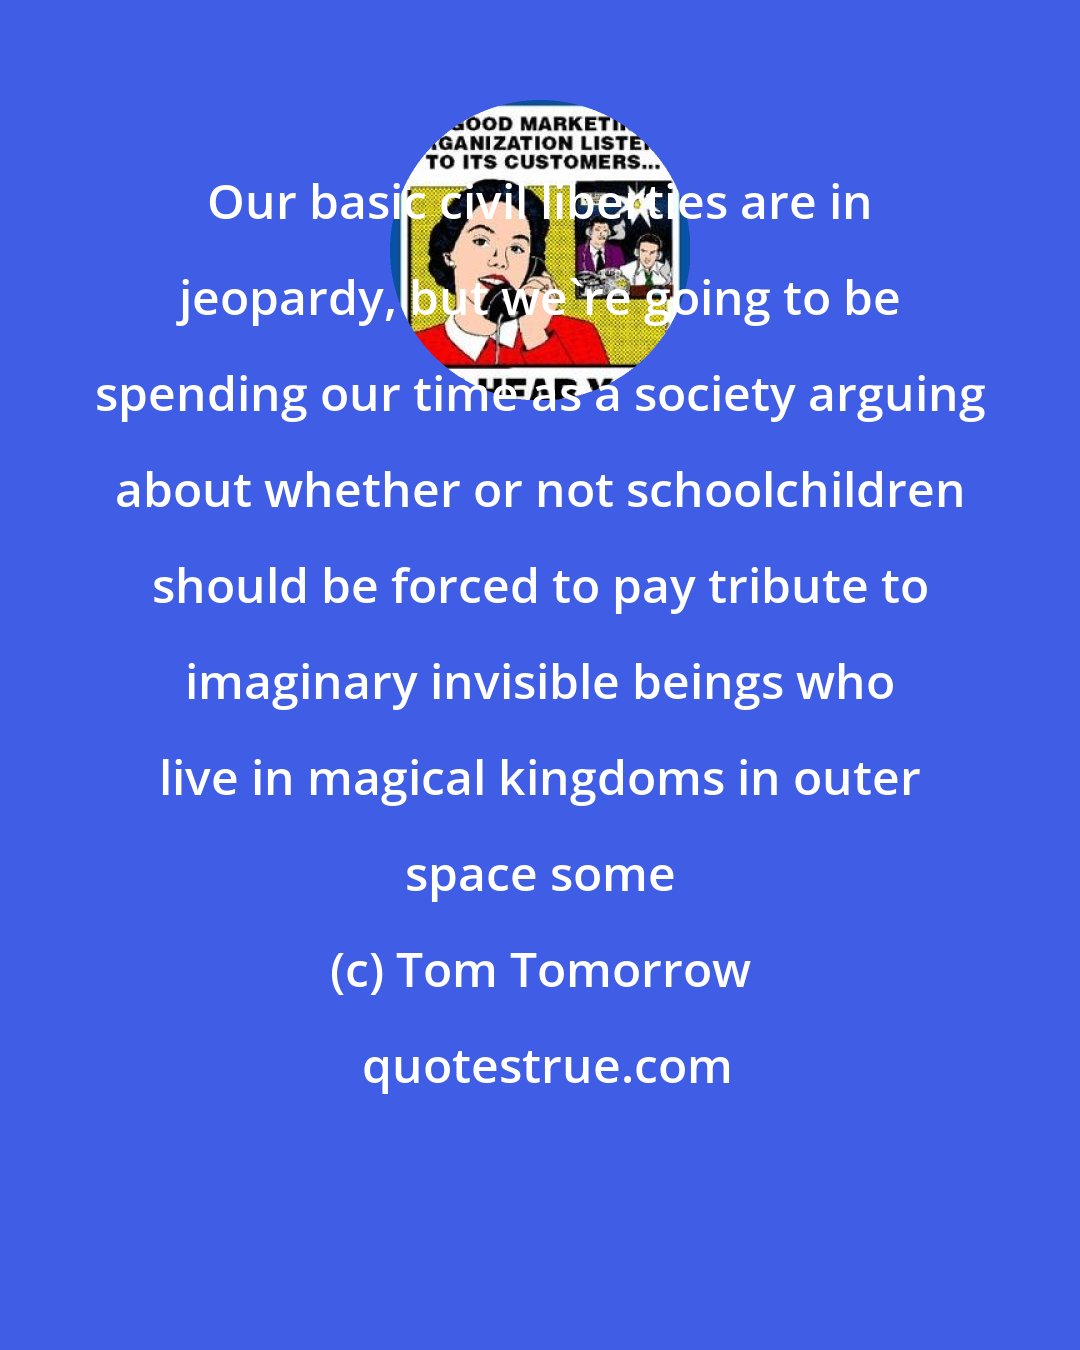 Tom Tomorrow: Our basic civil liberties are in jeopardy, but we're going to be spending our time as a society arguing about whether or not schoolchildren should be forced to pay tribute to imaginary invisible beings who live in magical kingdoms in outer space some